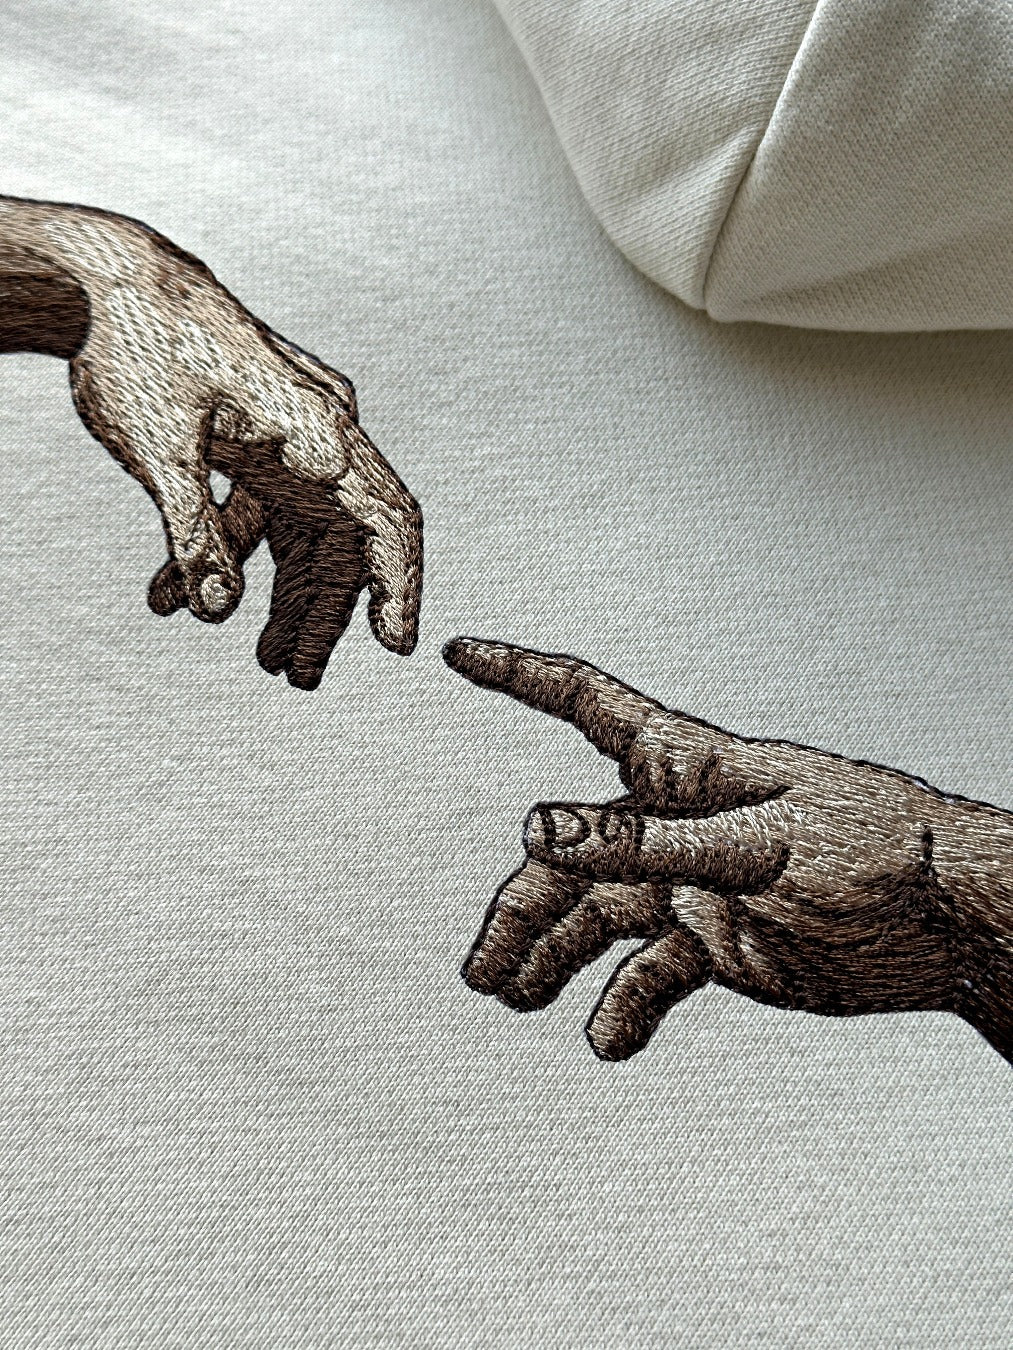 THE CREATION OF ADAM (BACK)